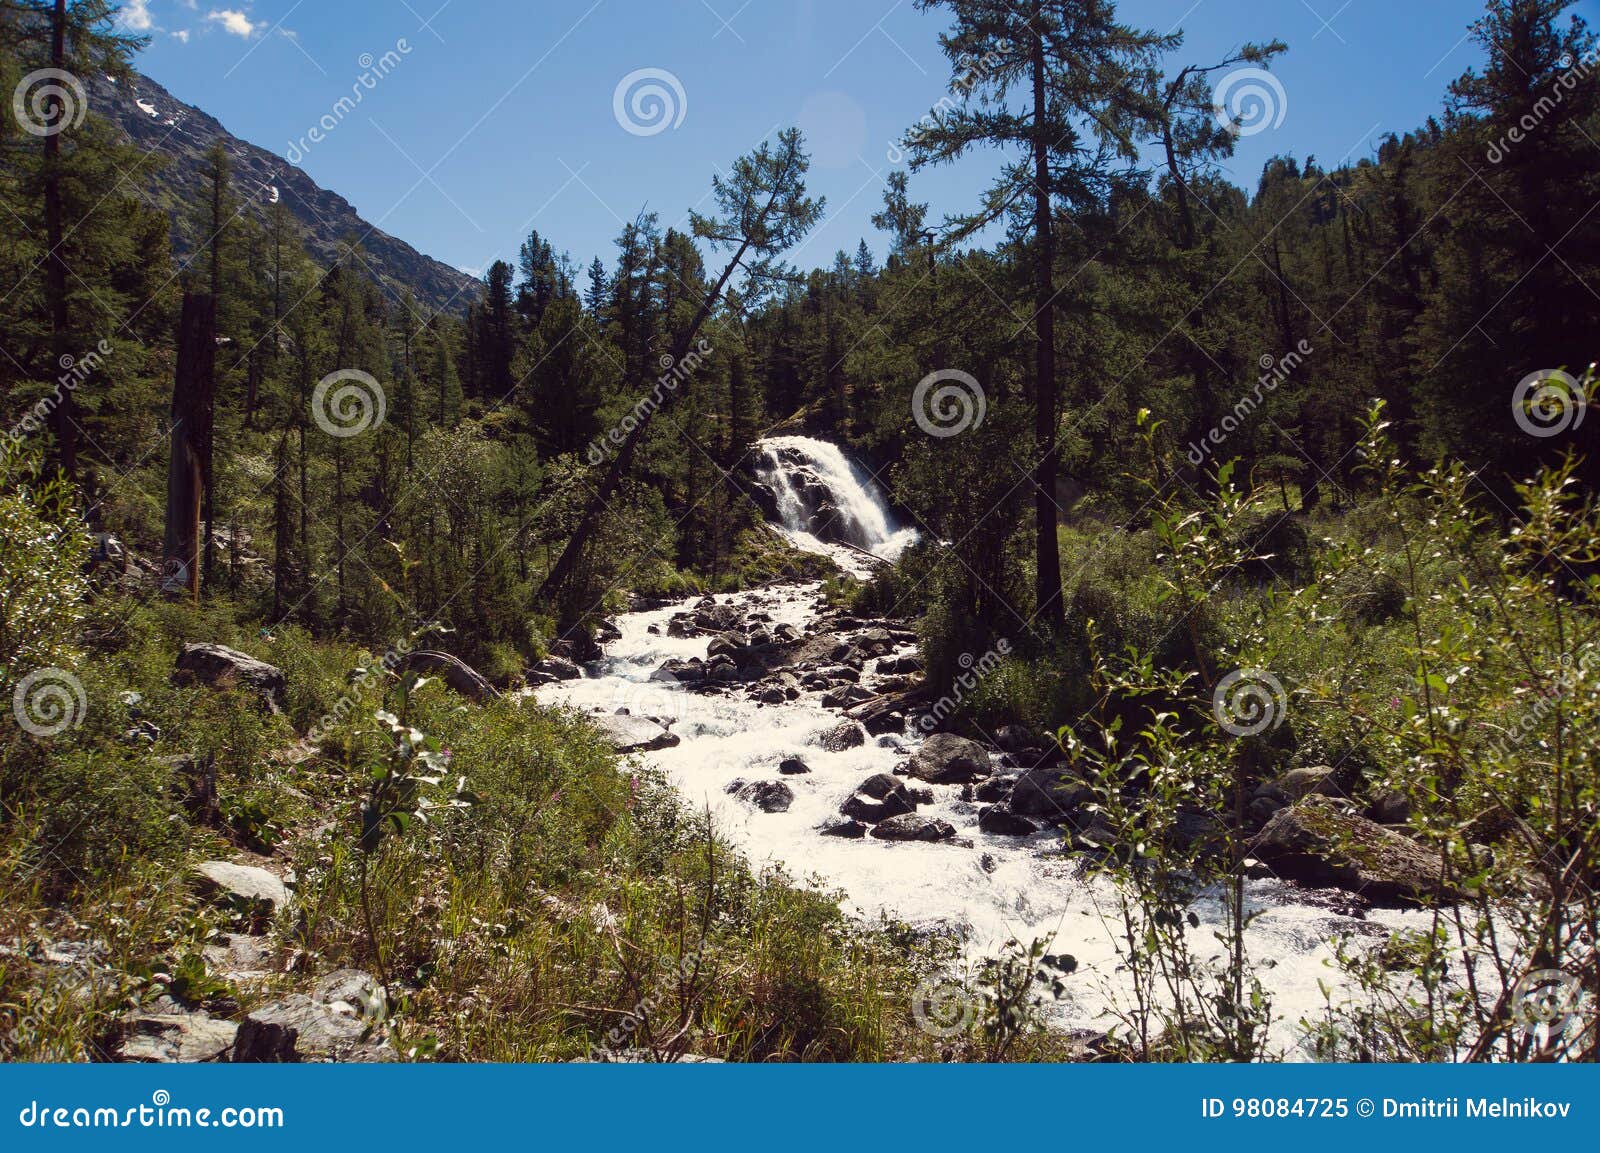 Beautiful Waterfall In A Wood On The Italian Dolomites Royalty Free